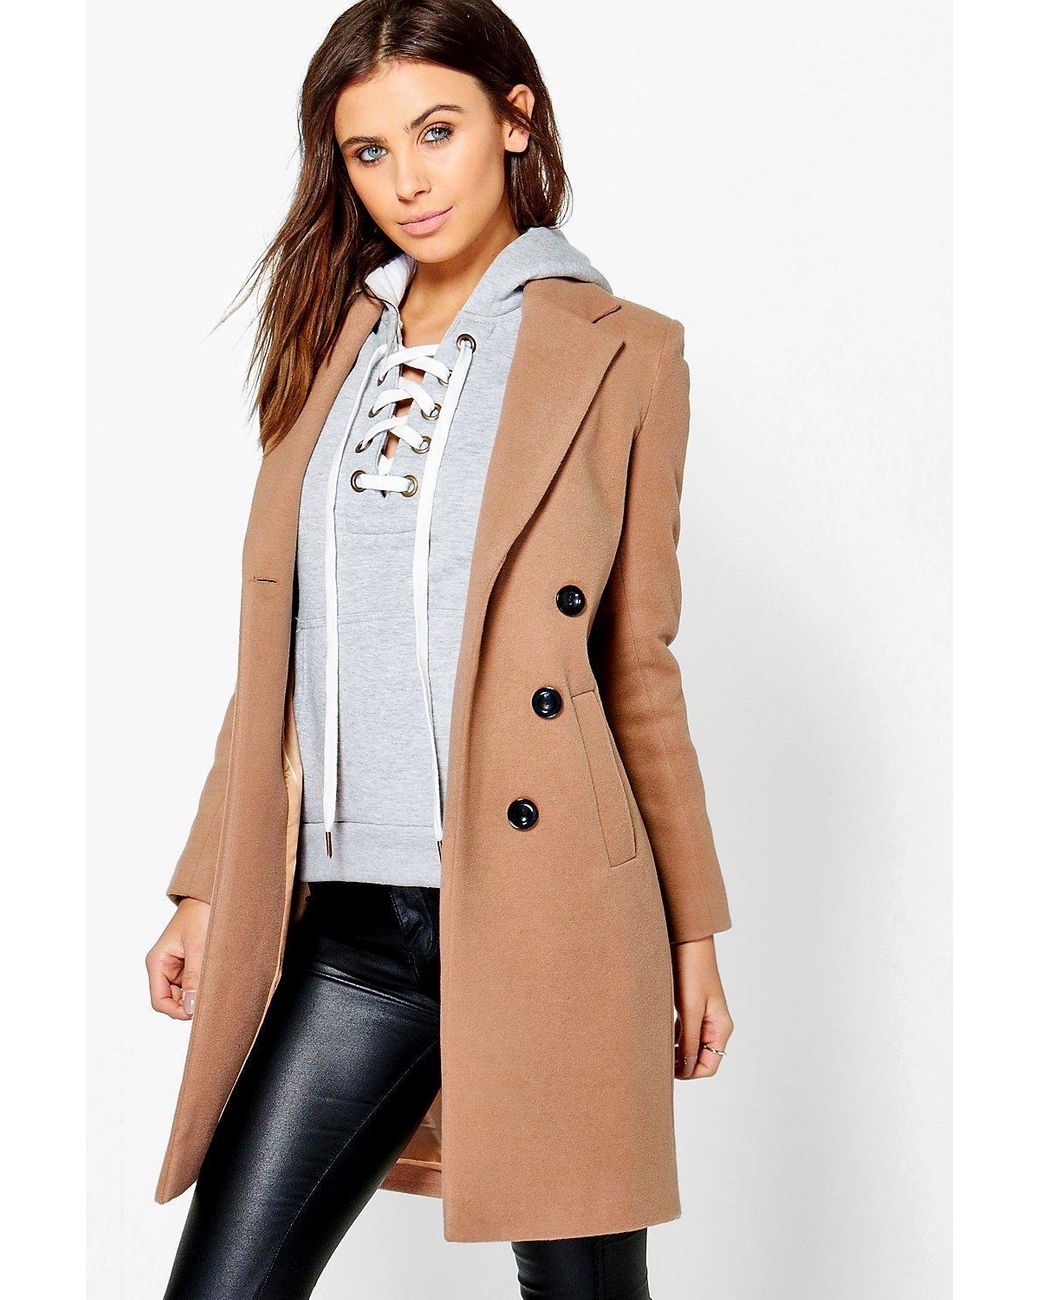 Boohoo Petite Fatih Double Breasted Camel Duster Coat in Natural | Lyst